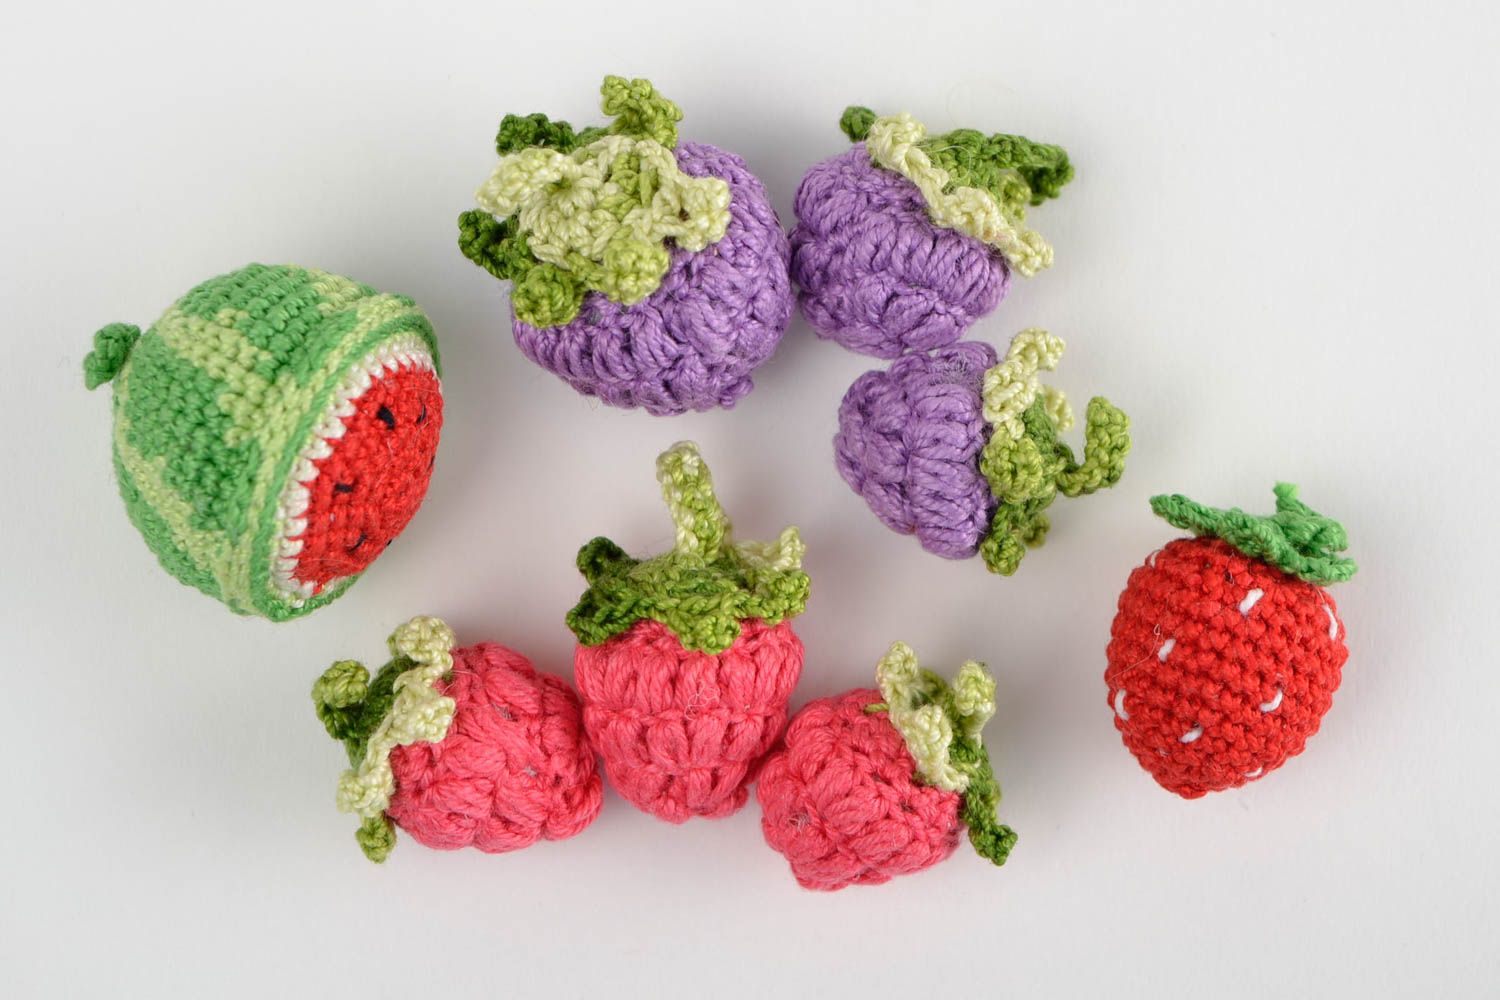 Handmade toys designer toy unusual toy crocheted toy for children gift ideas photo 4